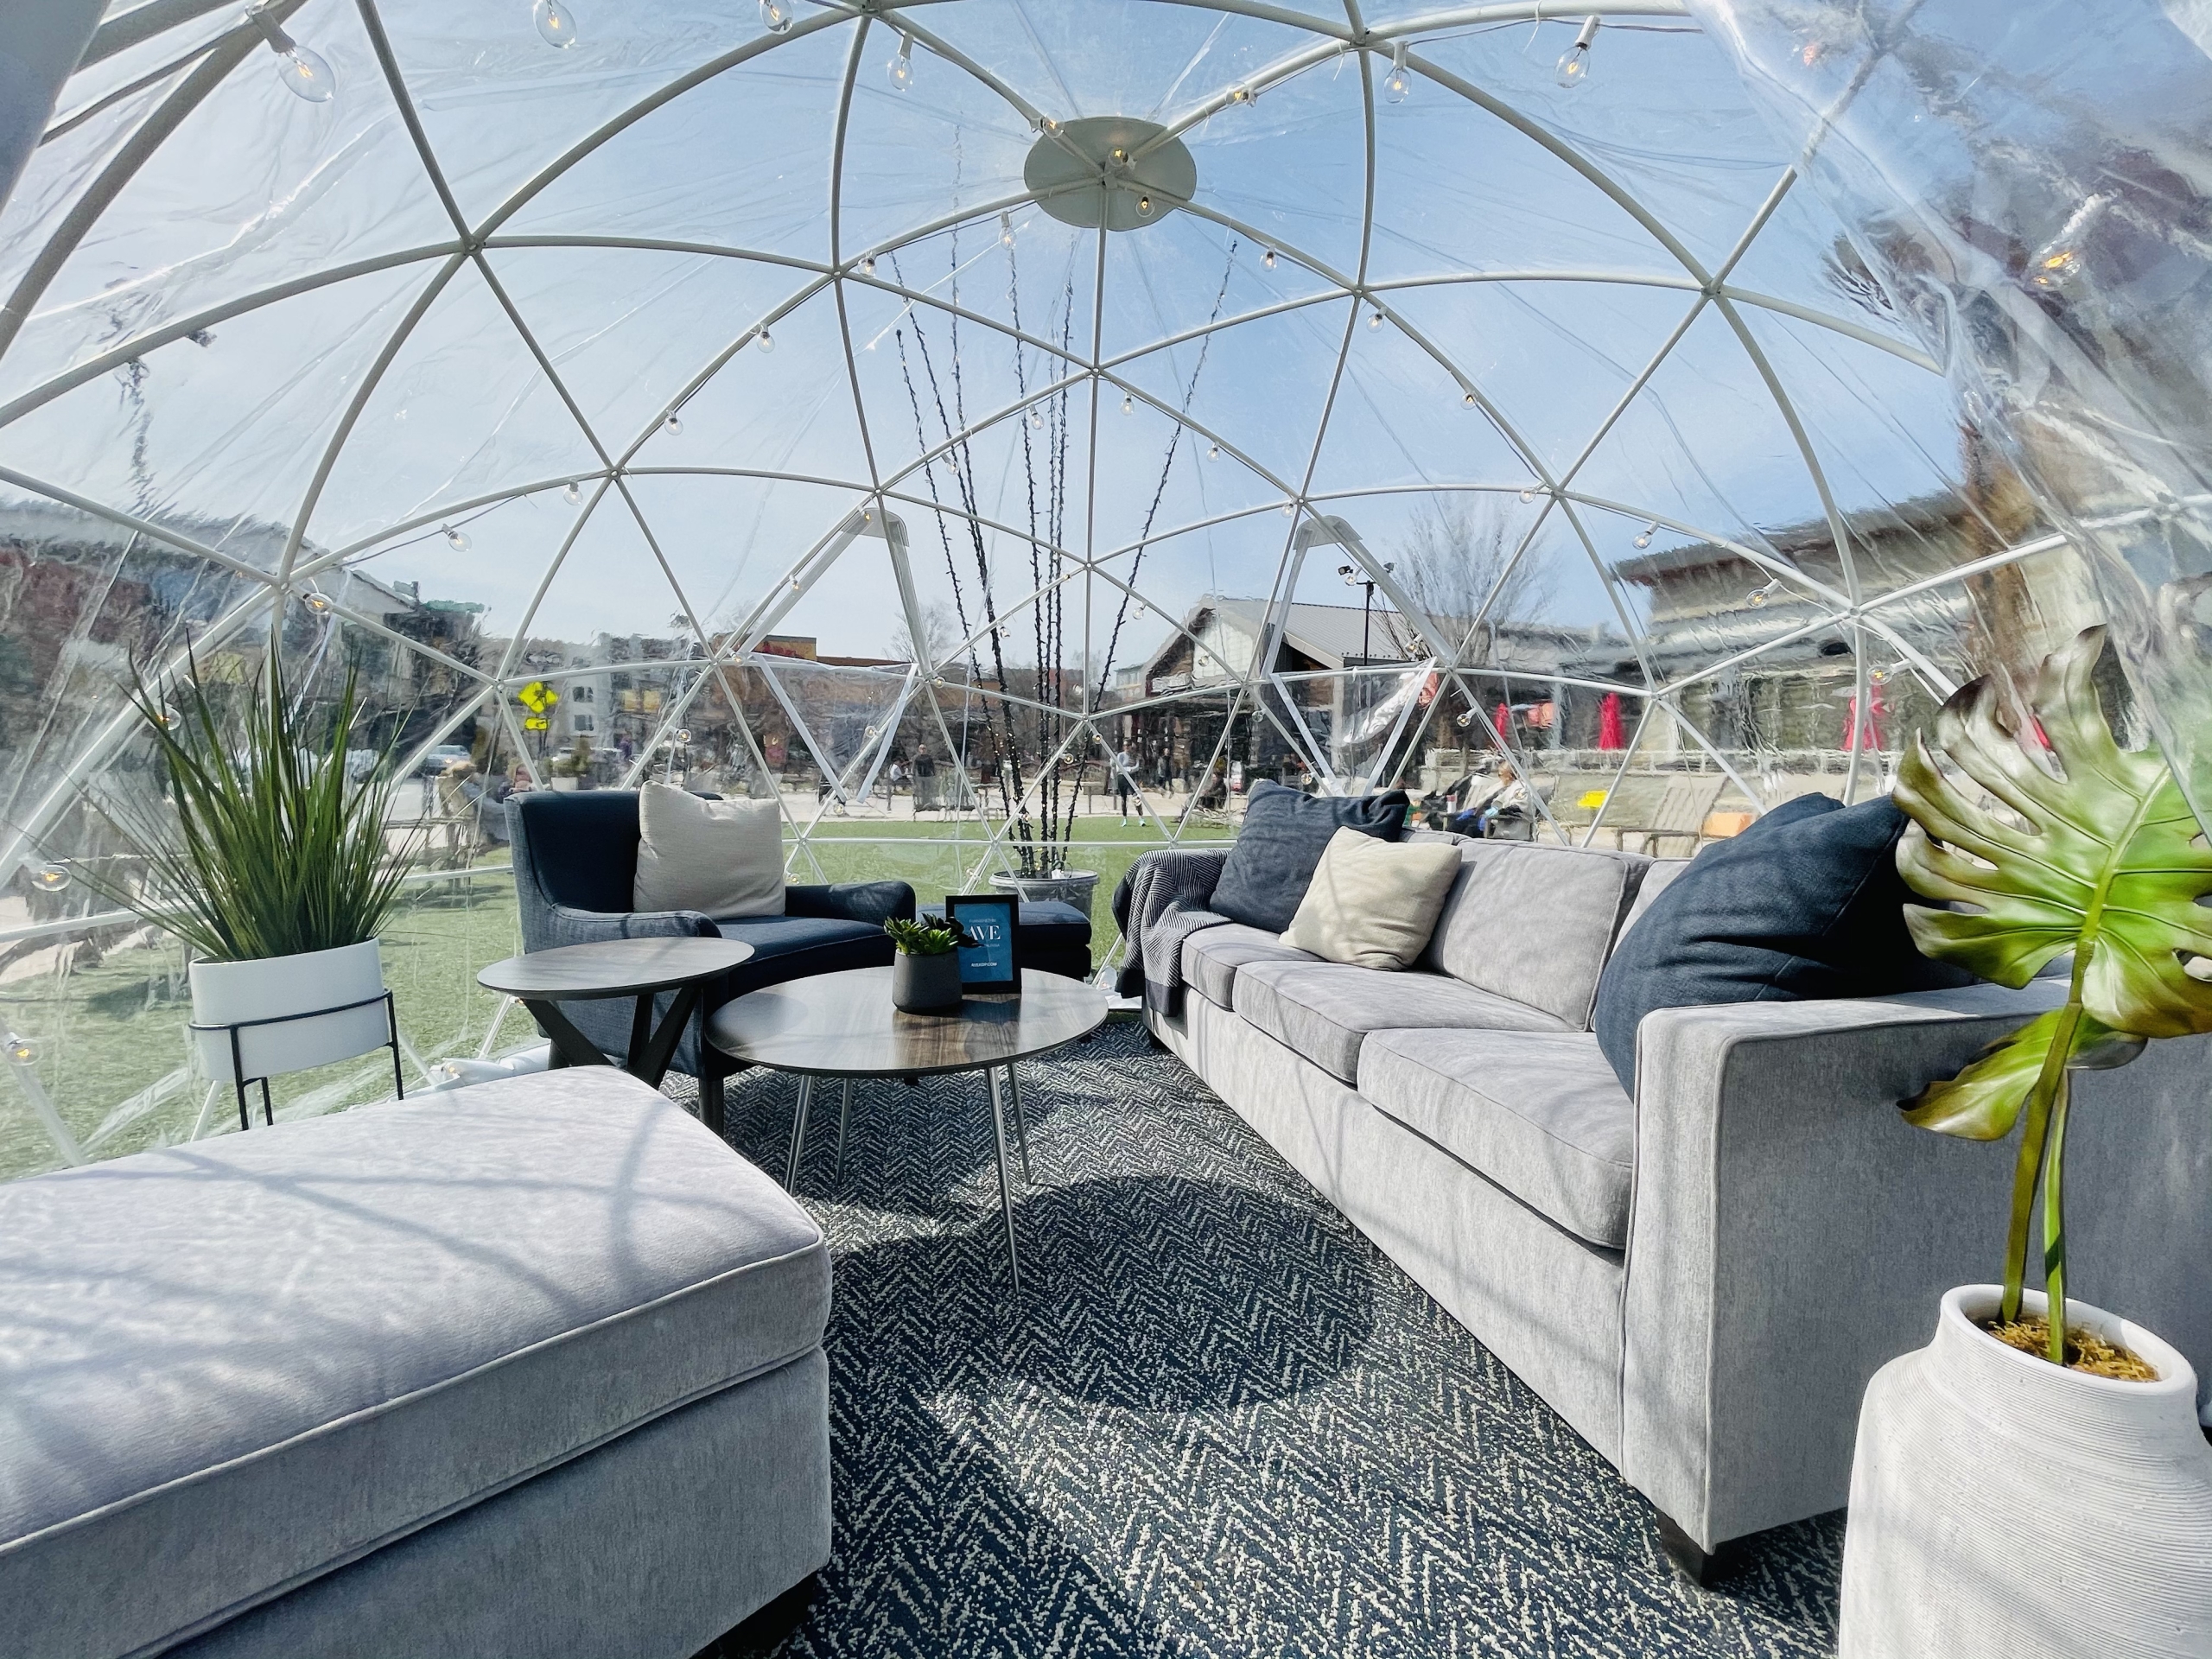 Living room furniture inside of a clear igloo outdoors